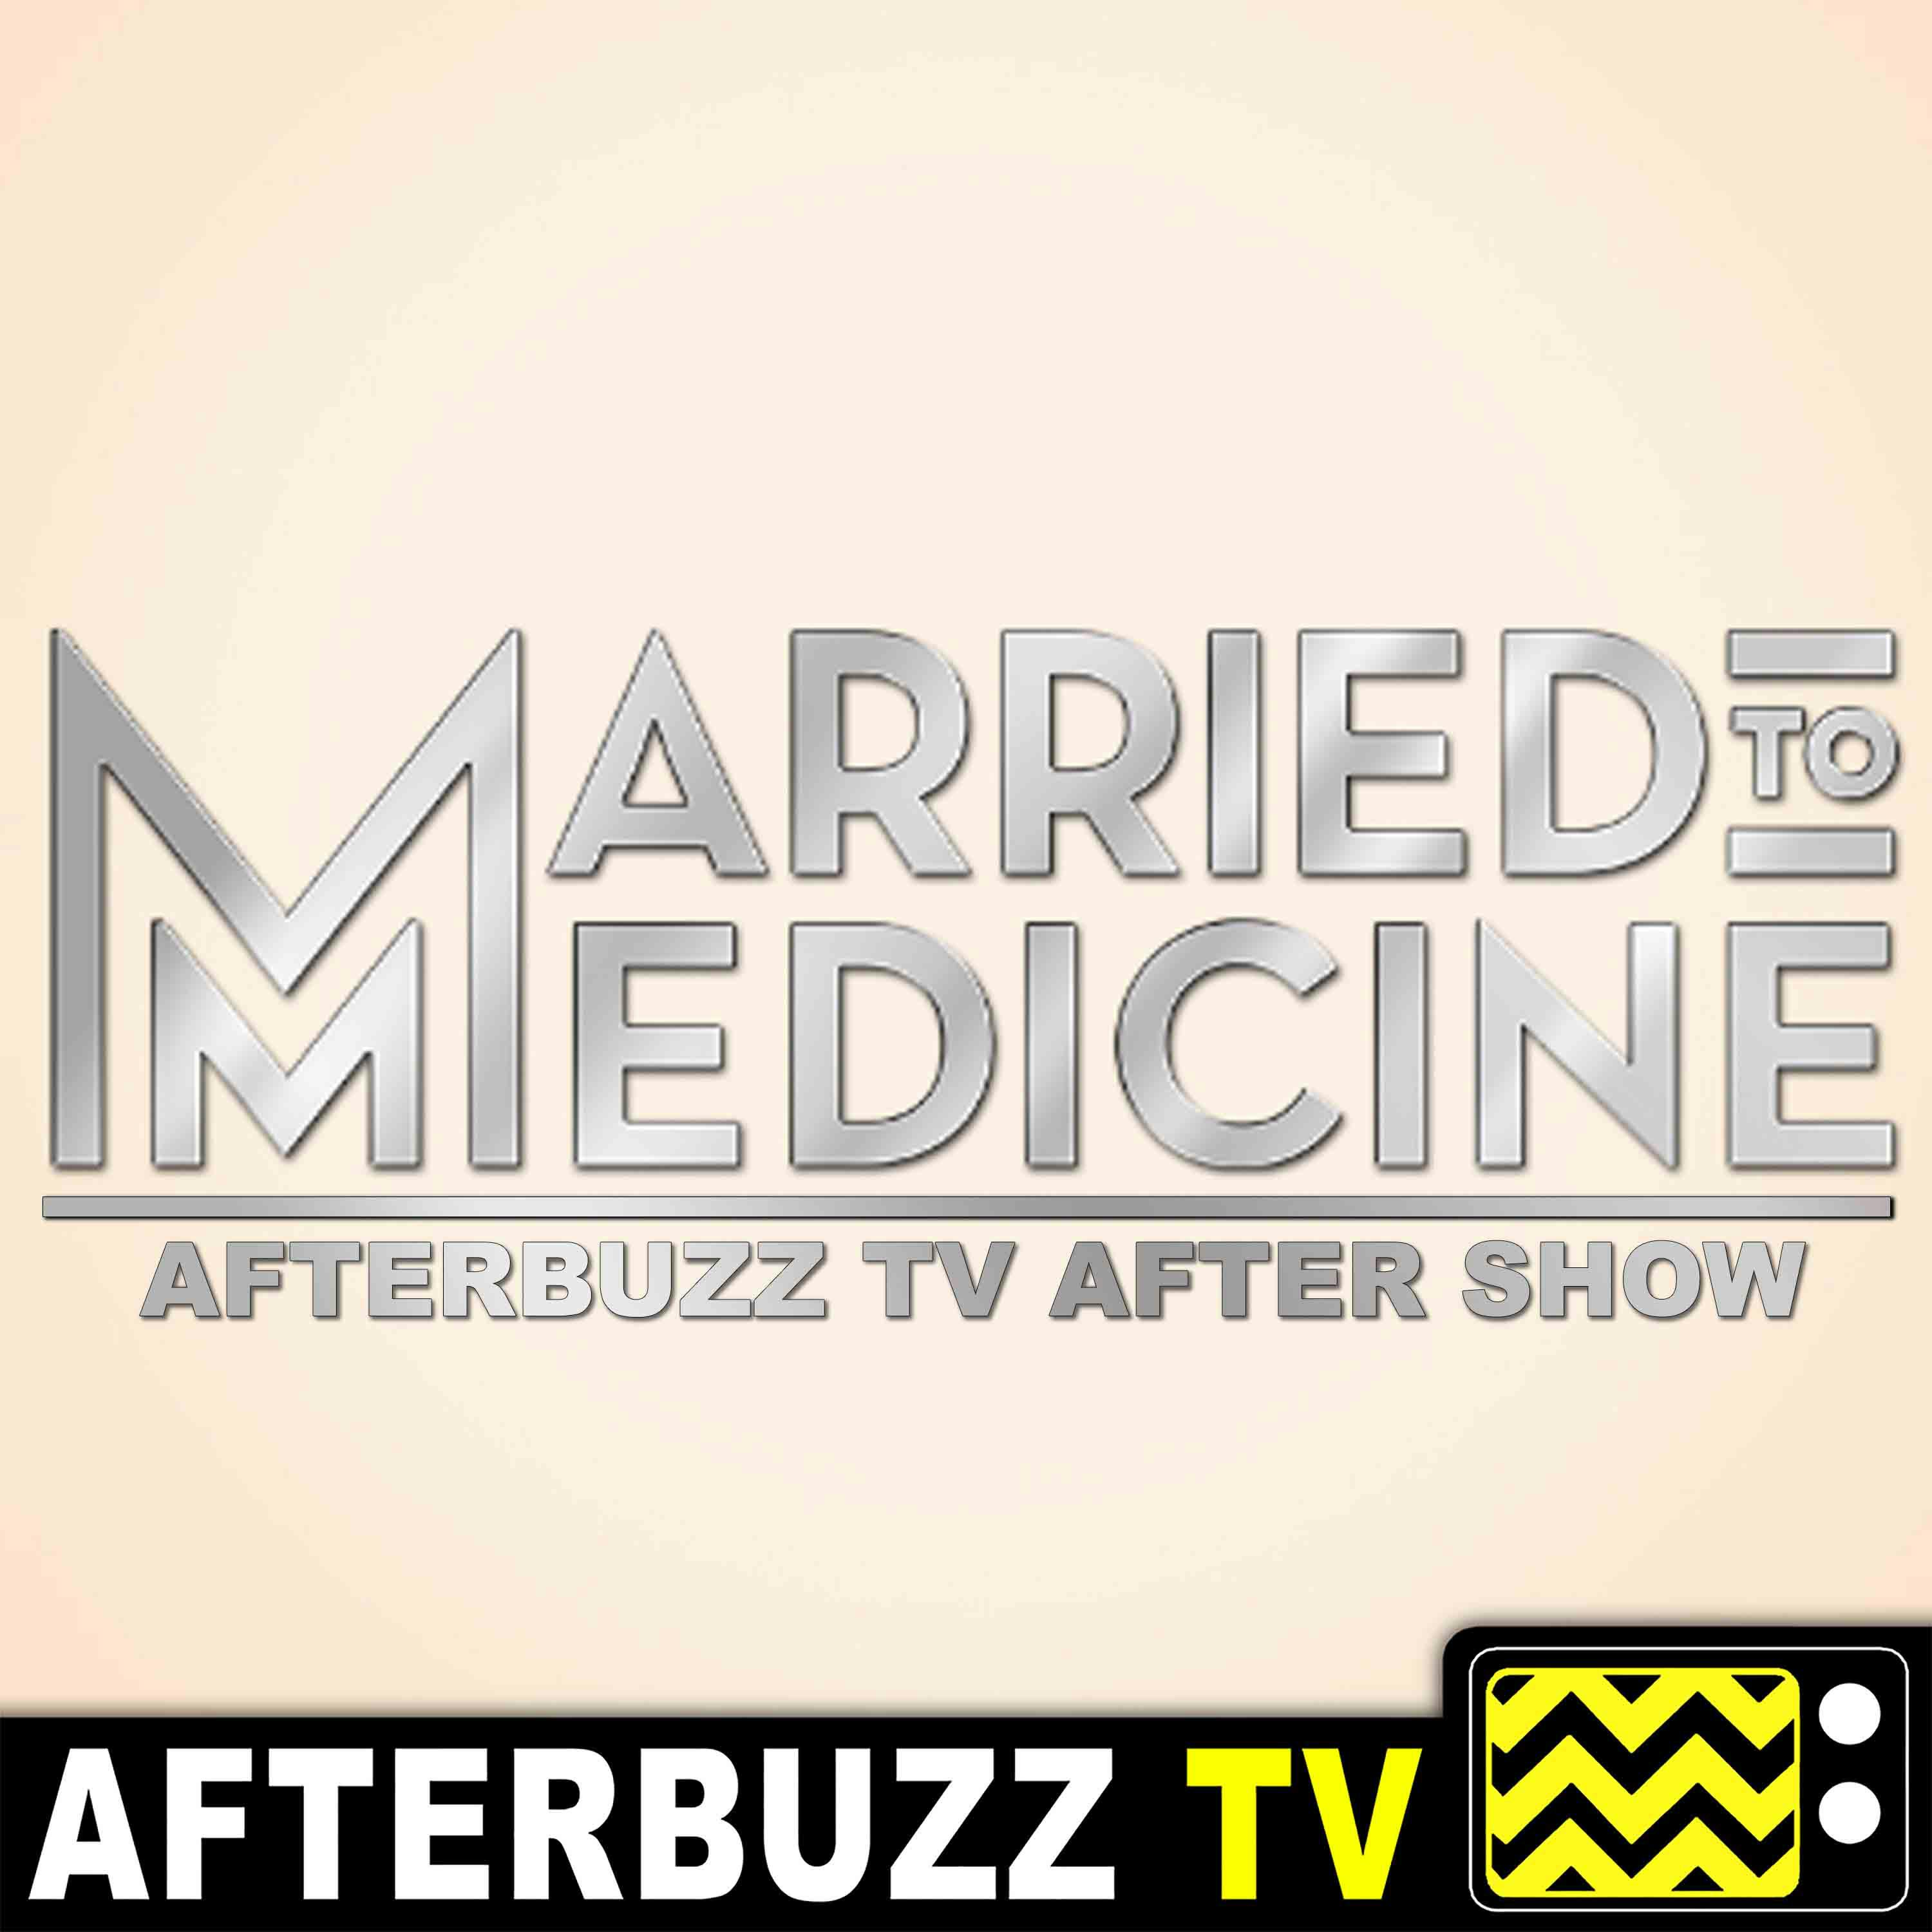 "Bus-Ted Cabo" Season 7 Episode 11 'Married to Medicine' Review